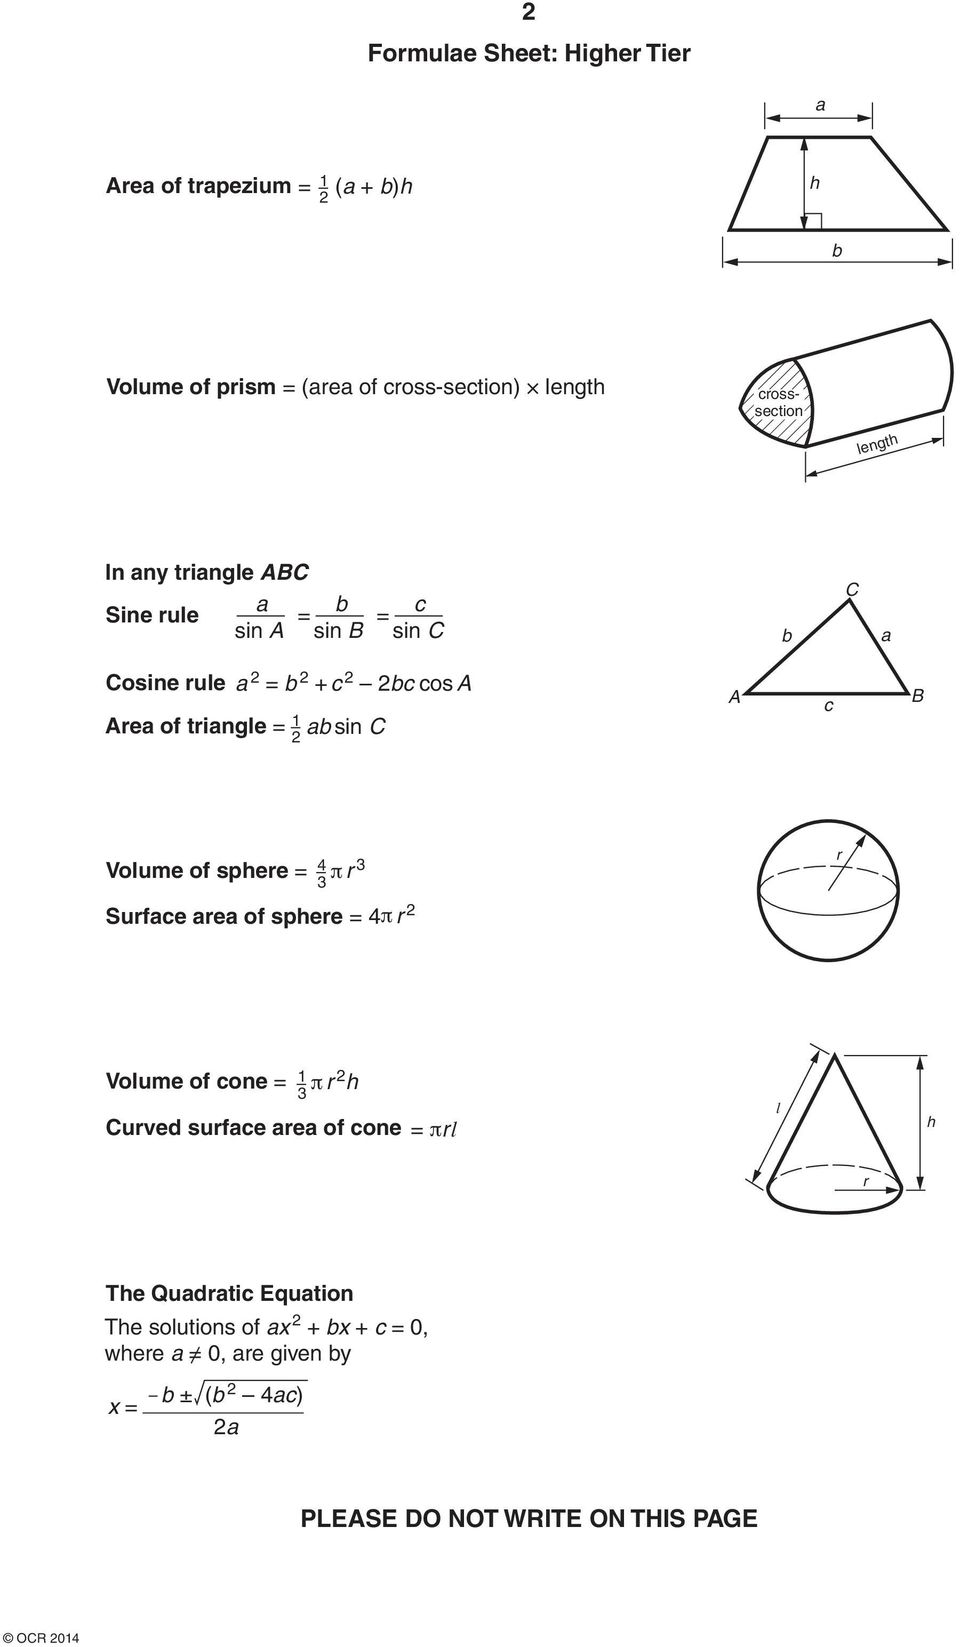 B Volume of sphere = 4 3 π r 3 Surface area of sphere = 4 π r 2 r Volume of cone = 1 3 π r 2 h Curved surface area of cone = π r l l h r